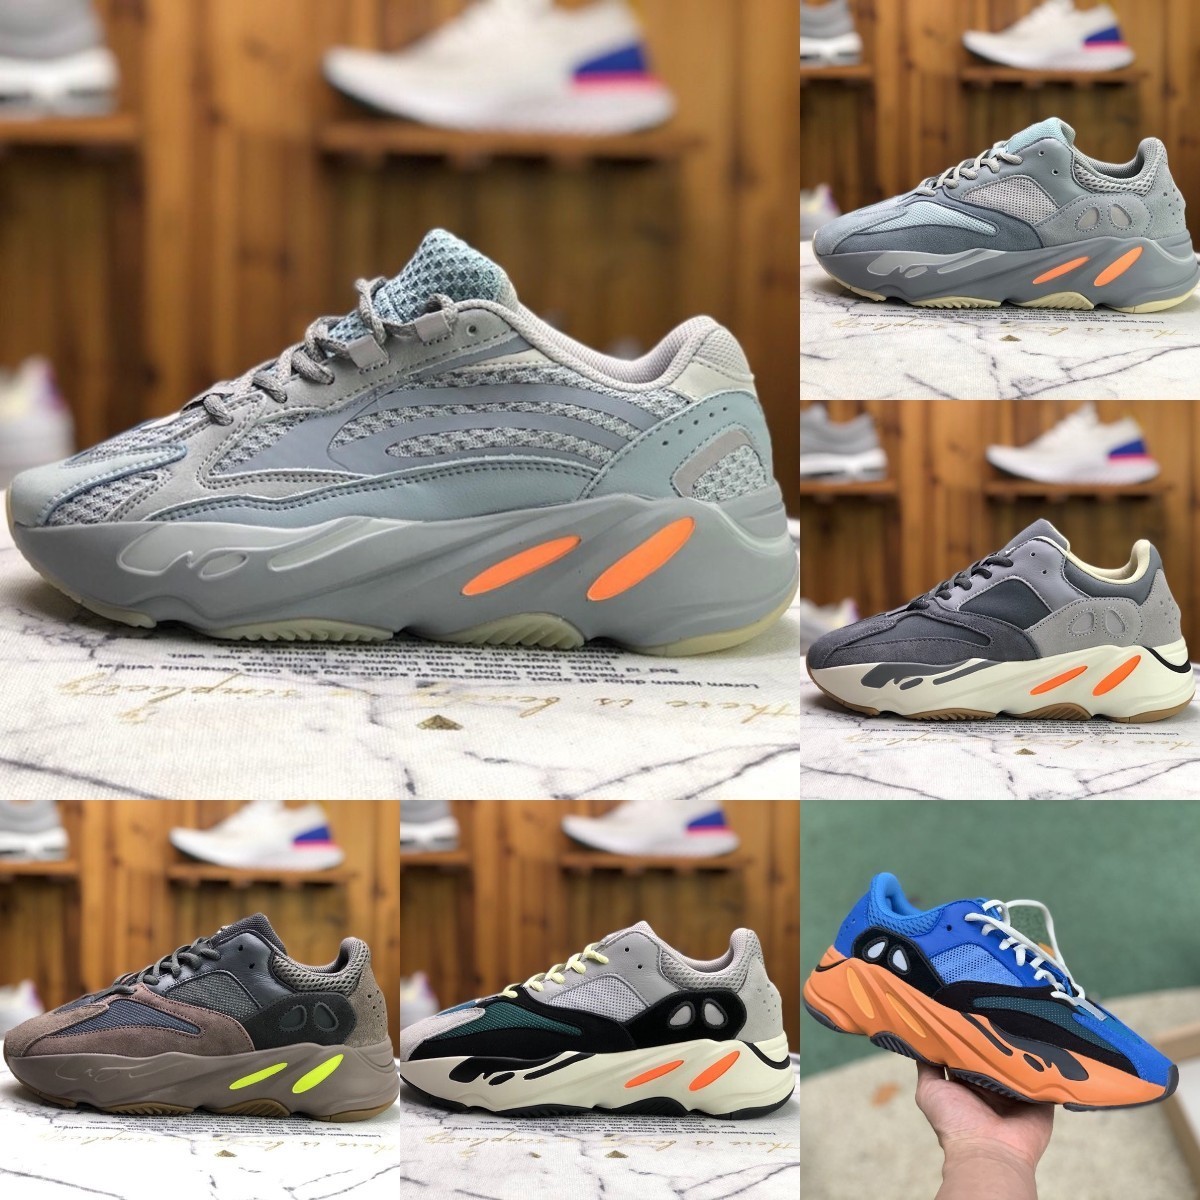 

High Quality Enflame Amber 700 V2 Sports Casual Shoes Men Women Runner Sea Bright Blue 700S Geode Alvah Azael Static Magnet Wave Solid Grey Tephra Trainer Sneakers S88, Please contact us